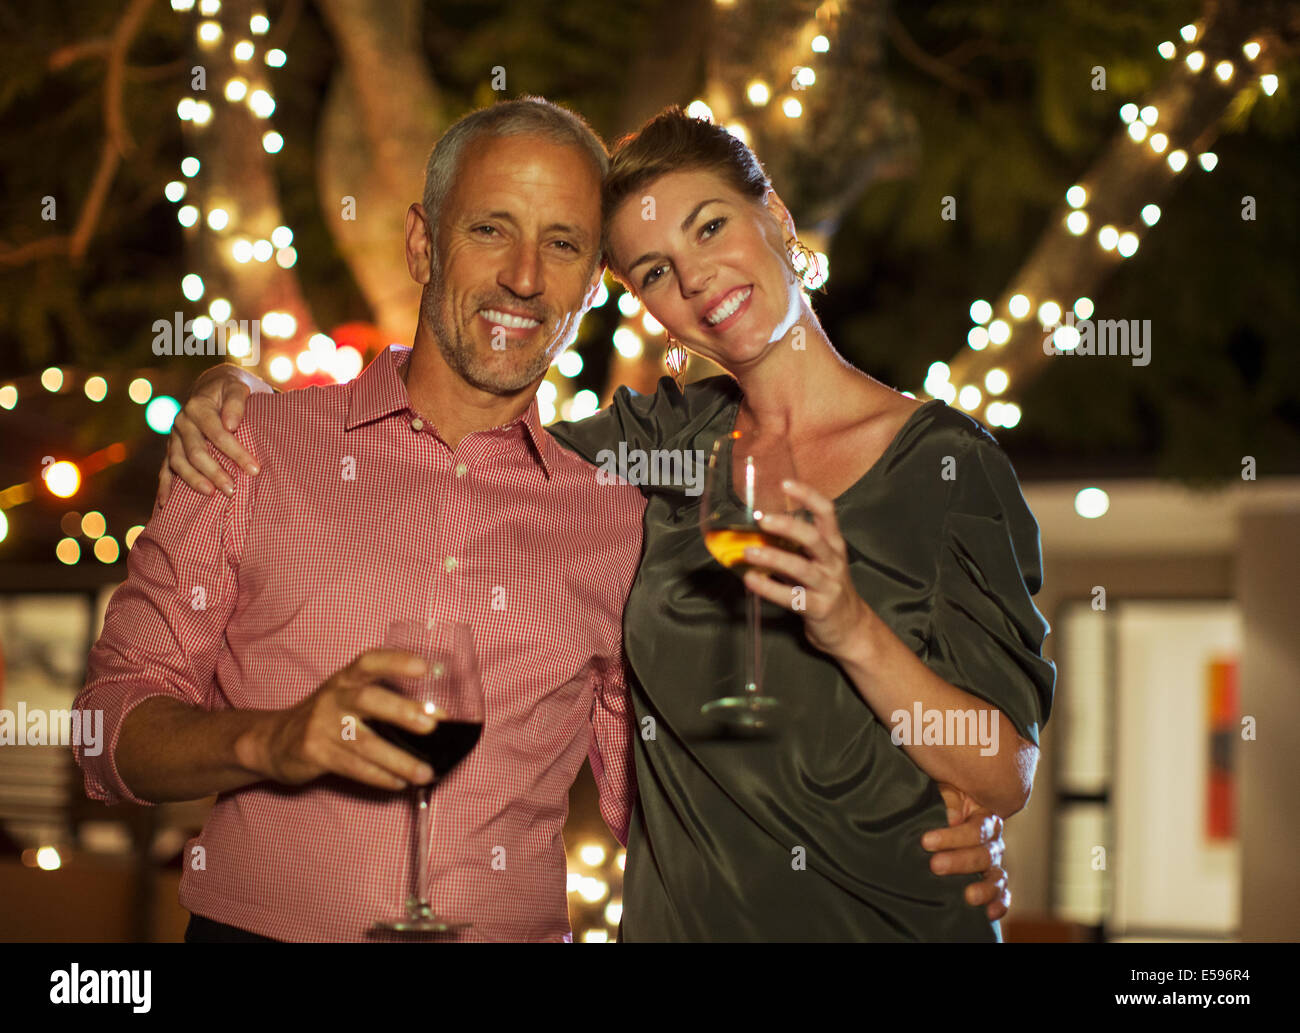 Couple drinking wine together outdoors Banque D'Images